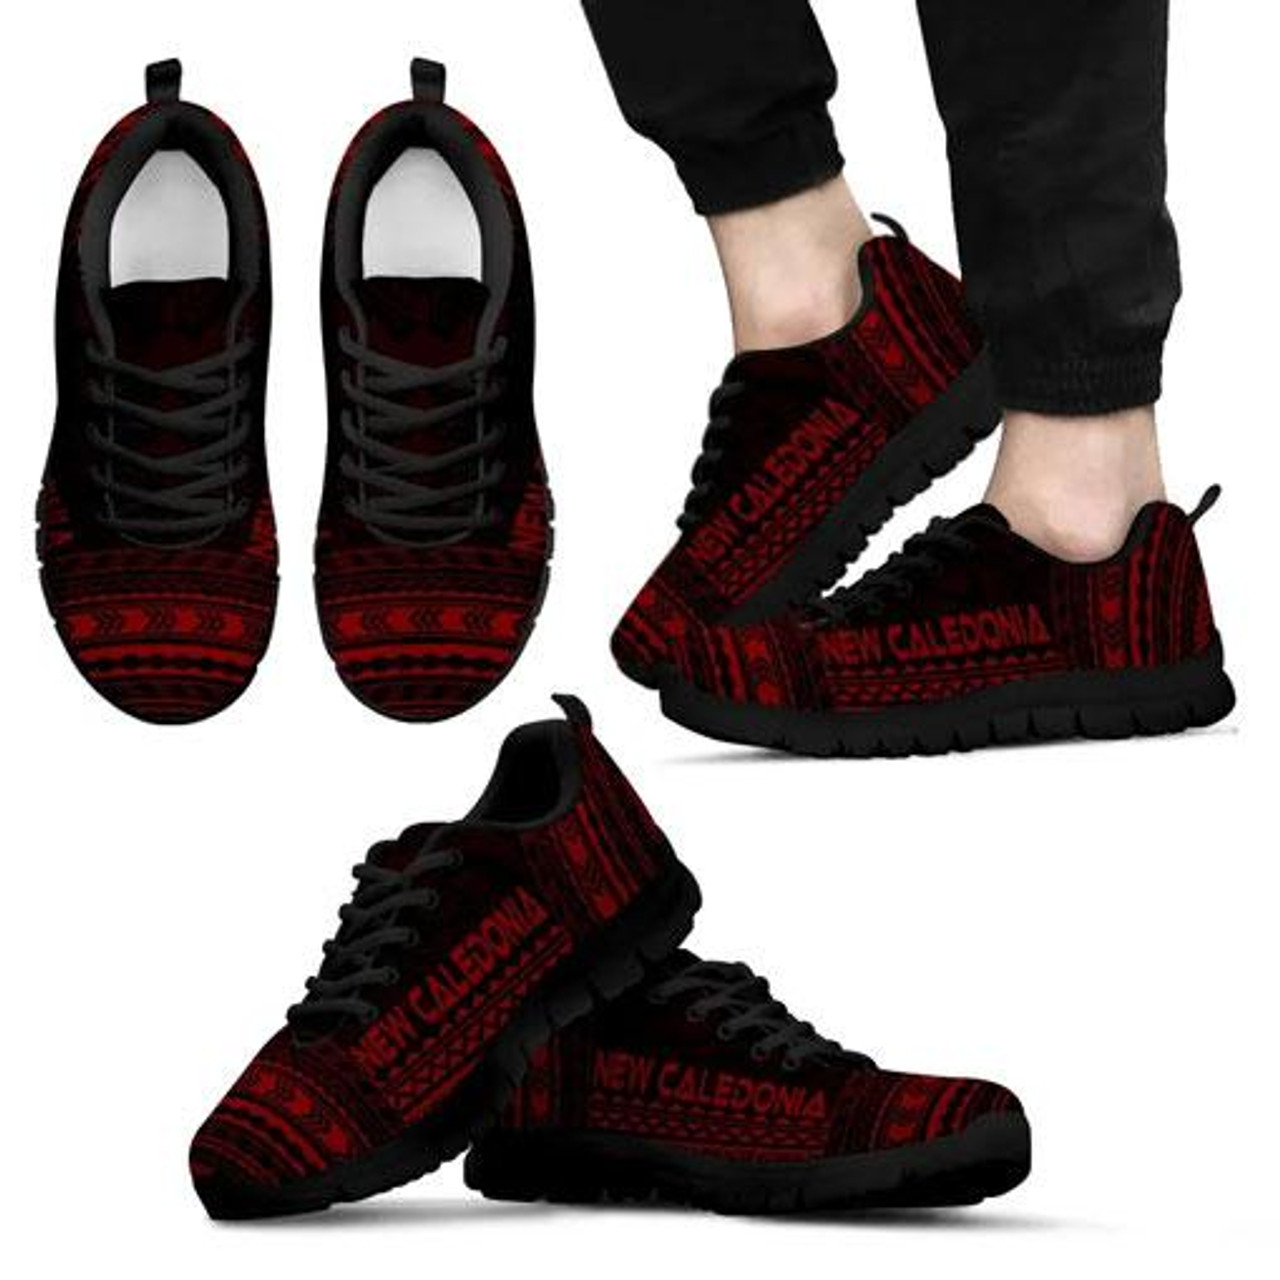 New Caledonia Sneakers - New Caledonia Polynesian Chief Tattoo Deep Red Version 2